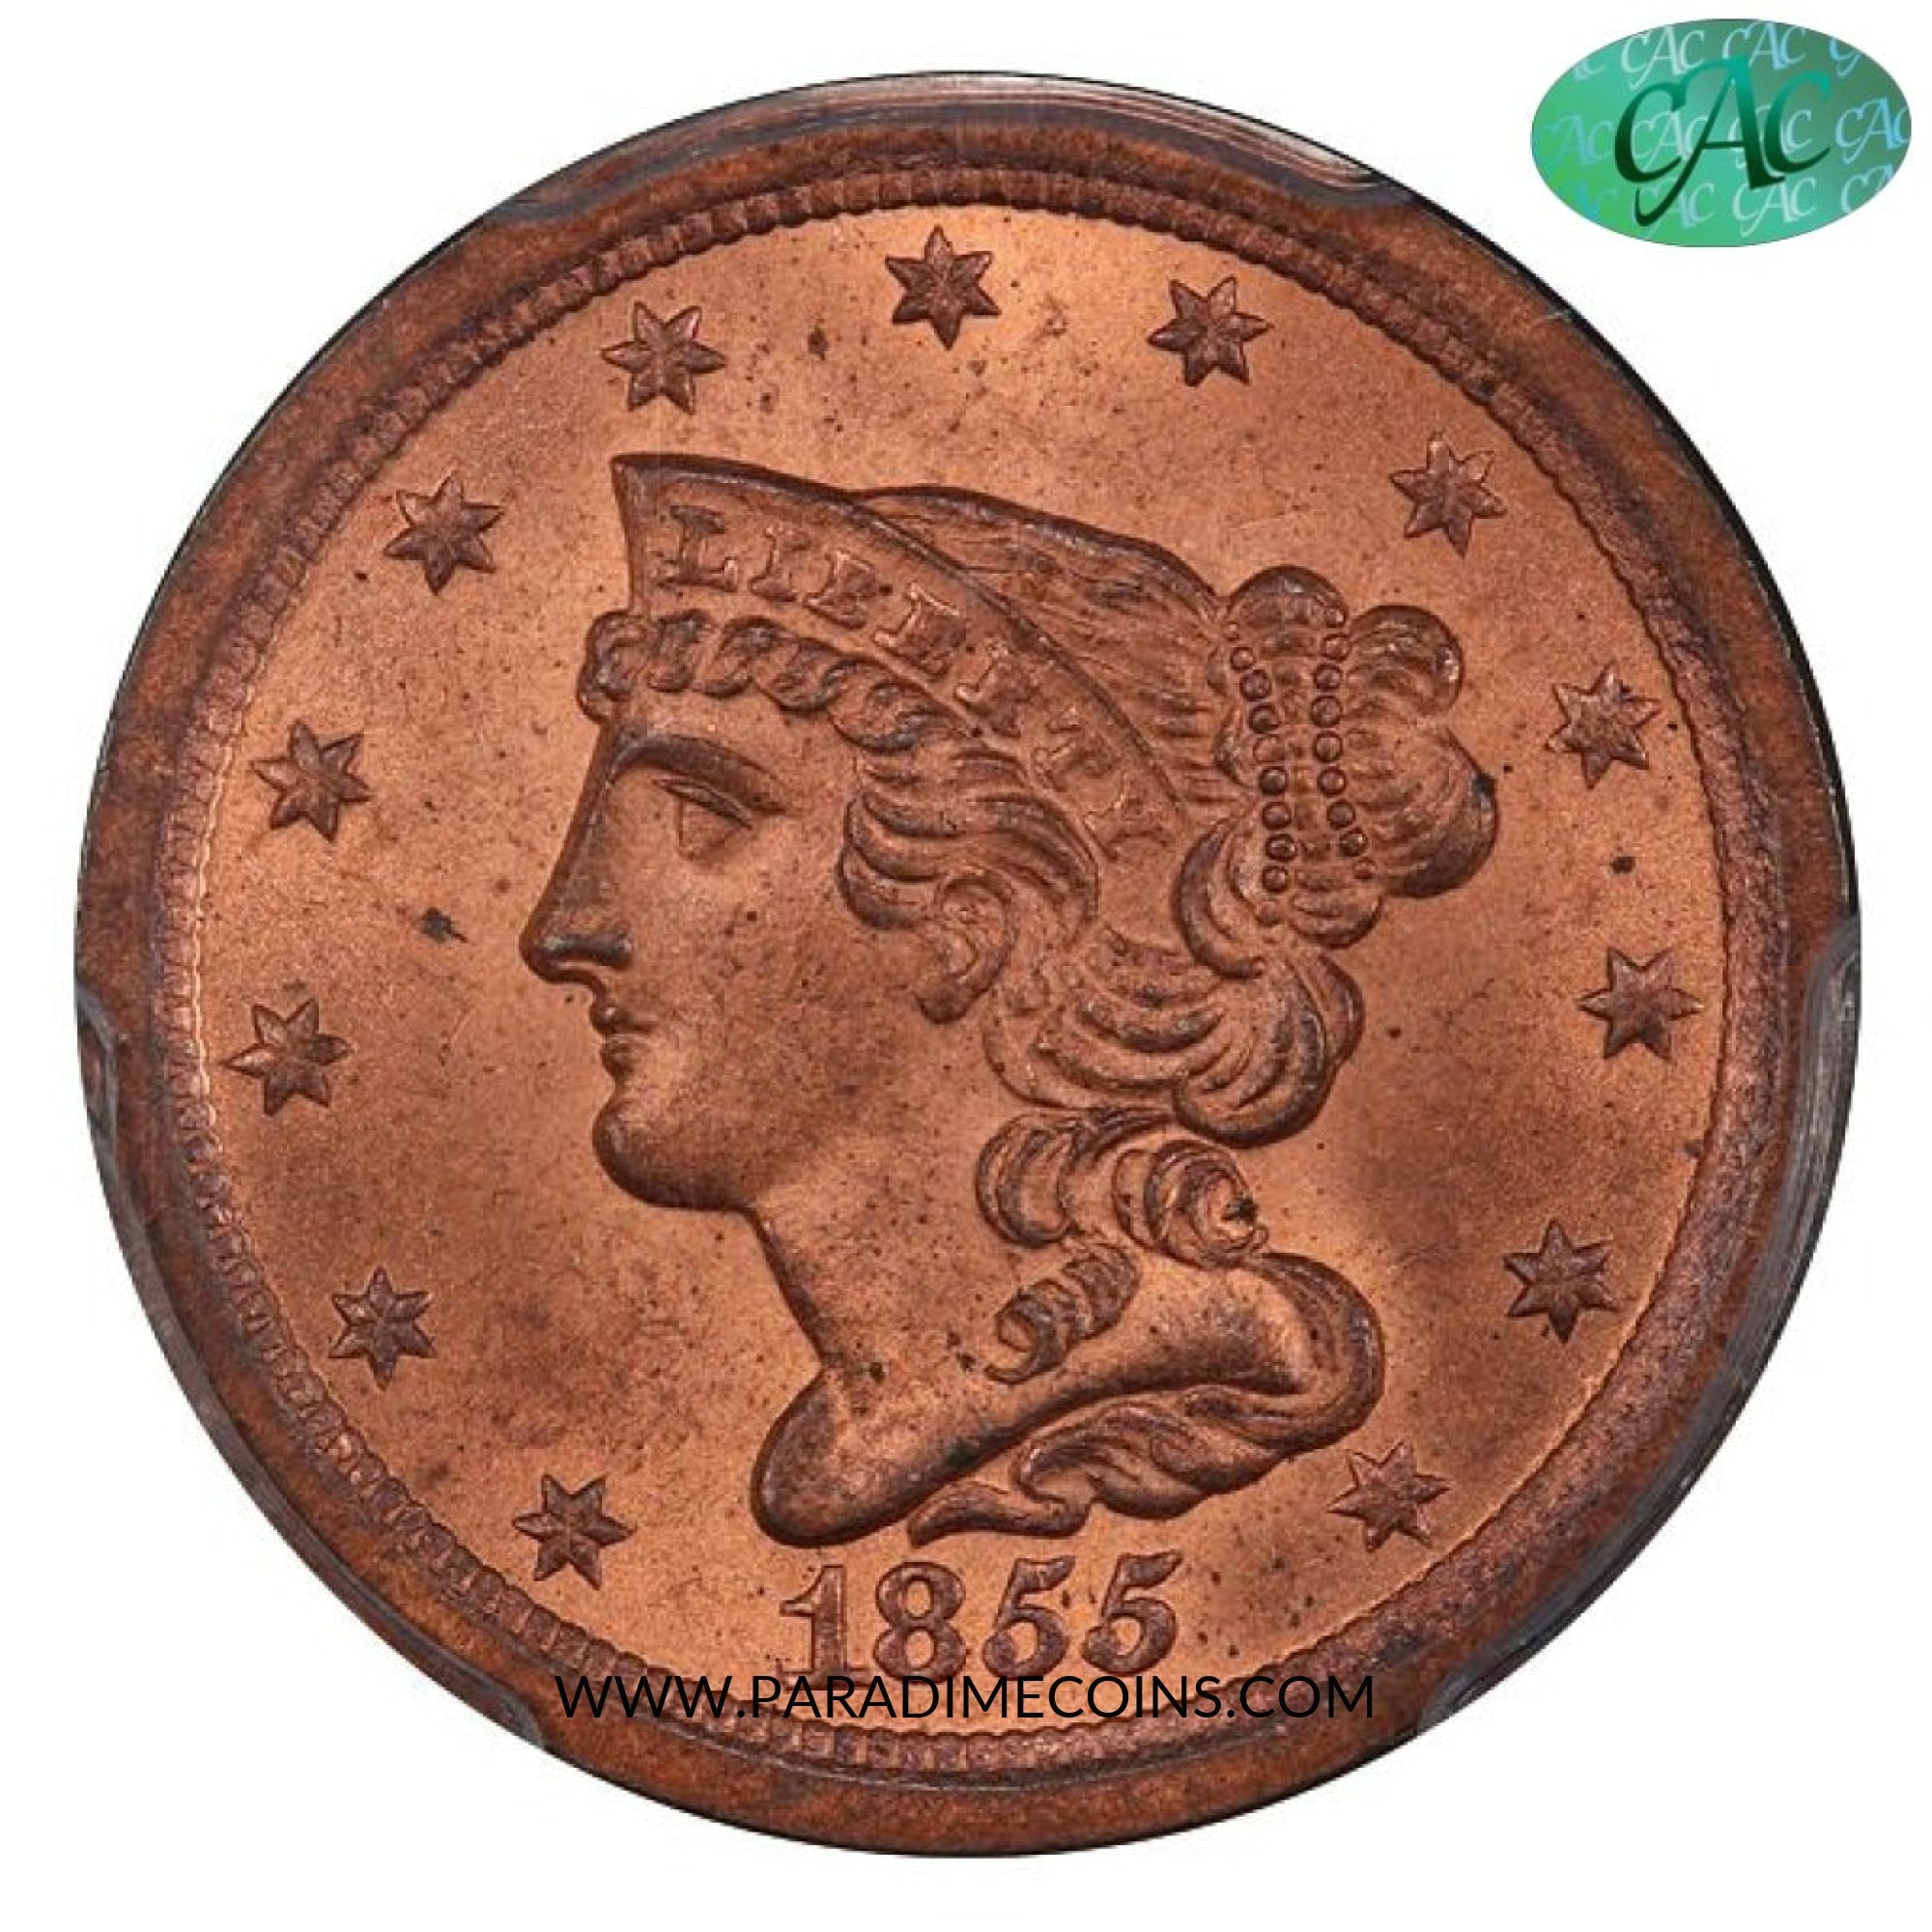 1855 1/2C MS65+ RD PCGS CAC - Paradime Coins | PCGS NGC CACG CAC Rare US Numismatic Coins For Sale